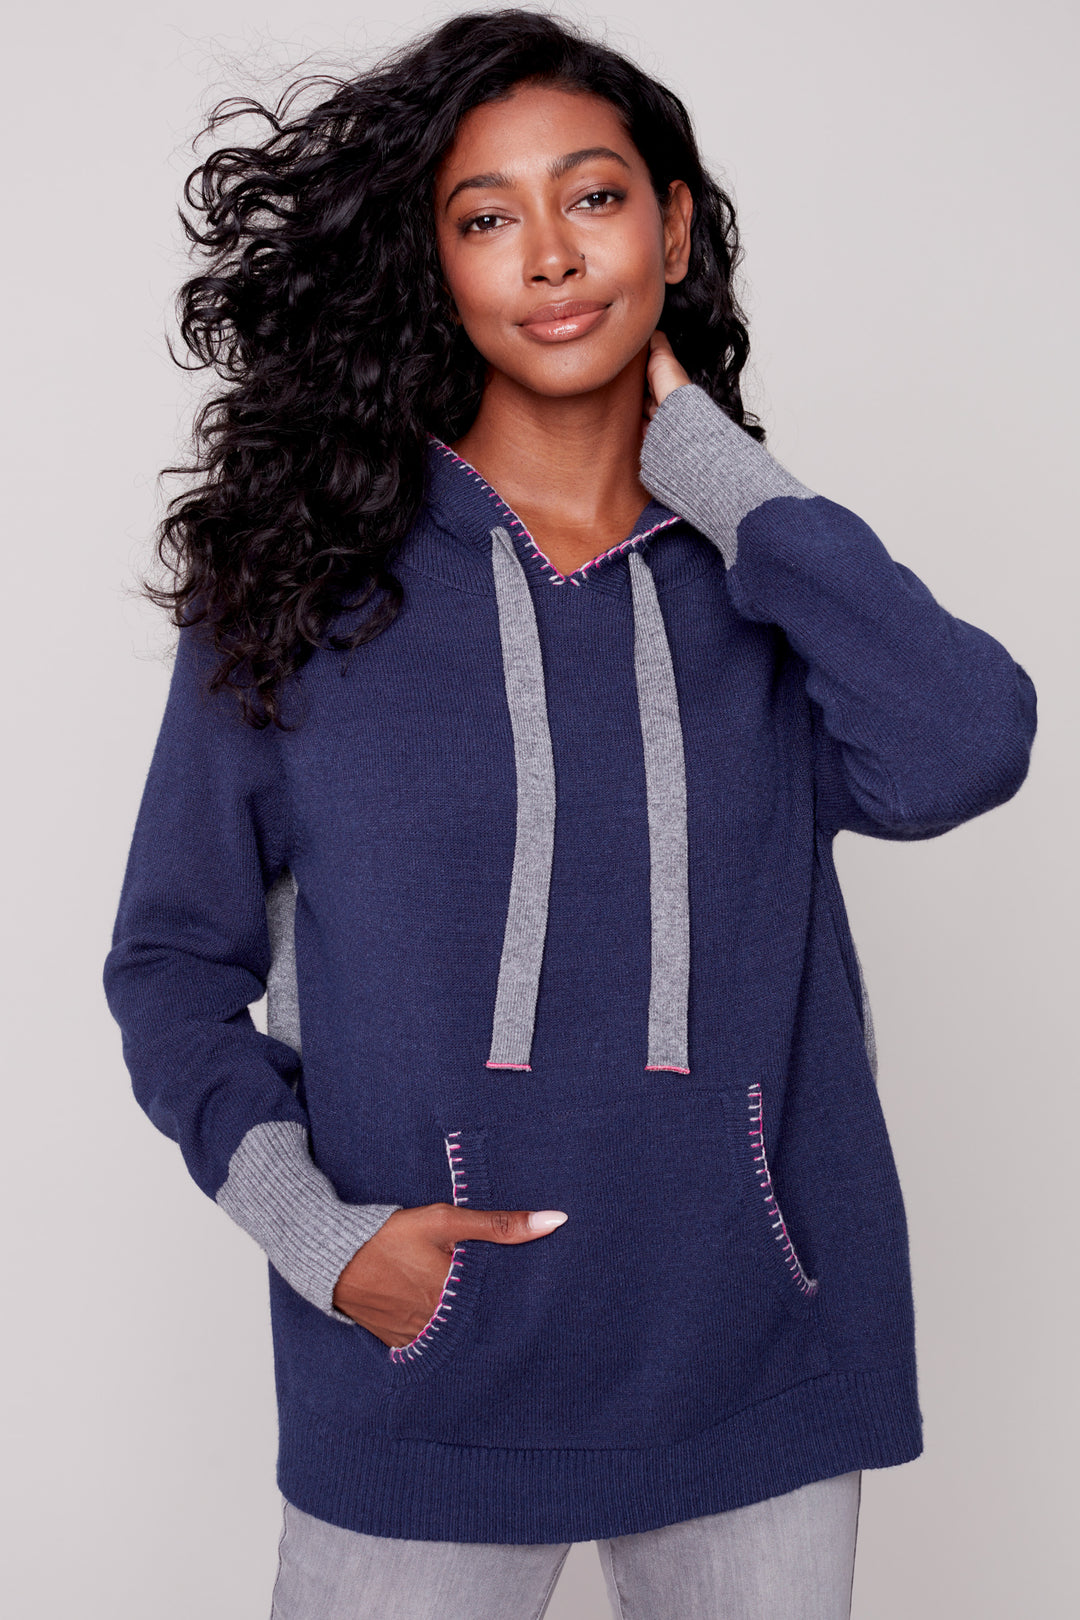 It's made with a super plush knit for extra warmth and features a kangaroo hoodie with a blanket stitch detail for added style.